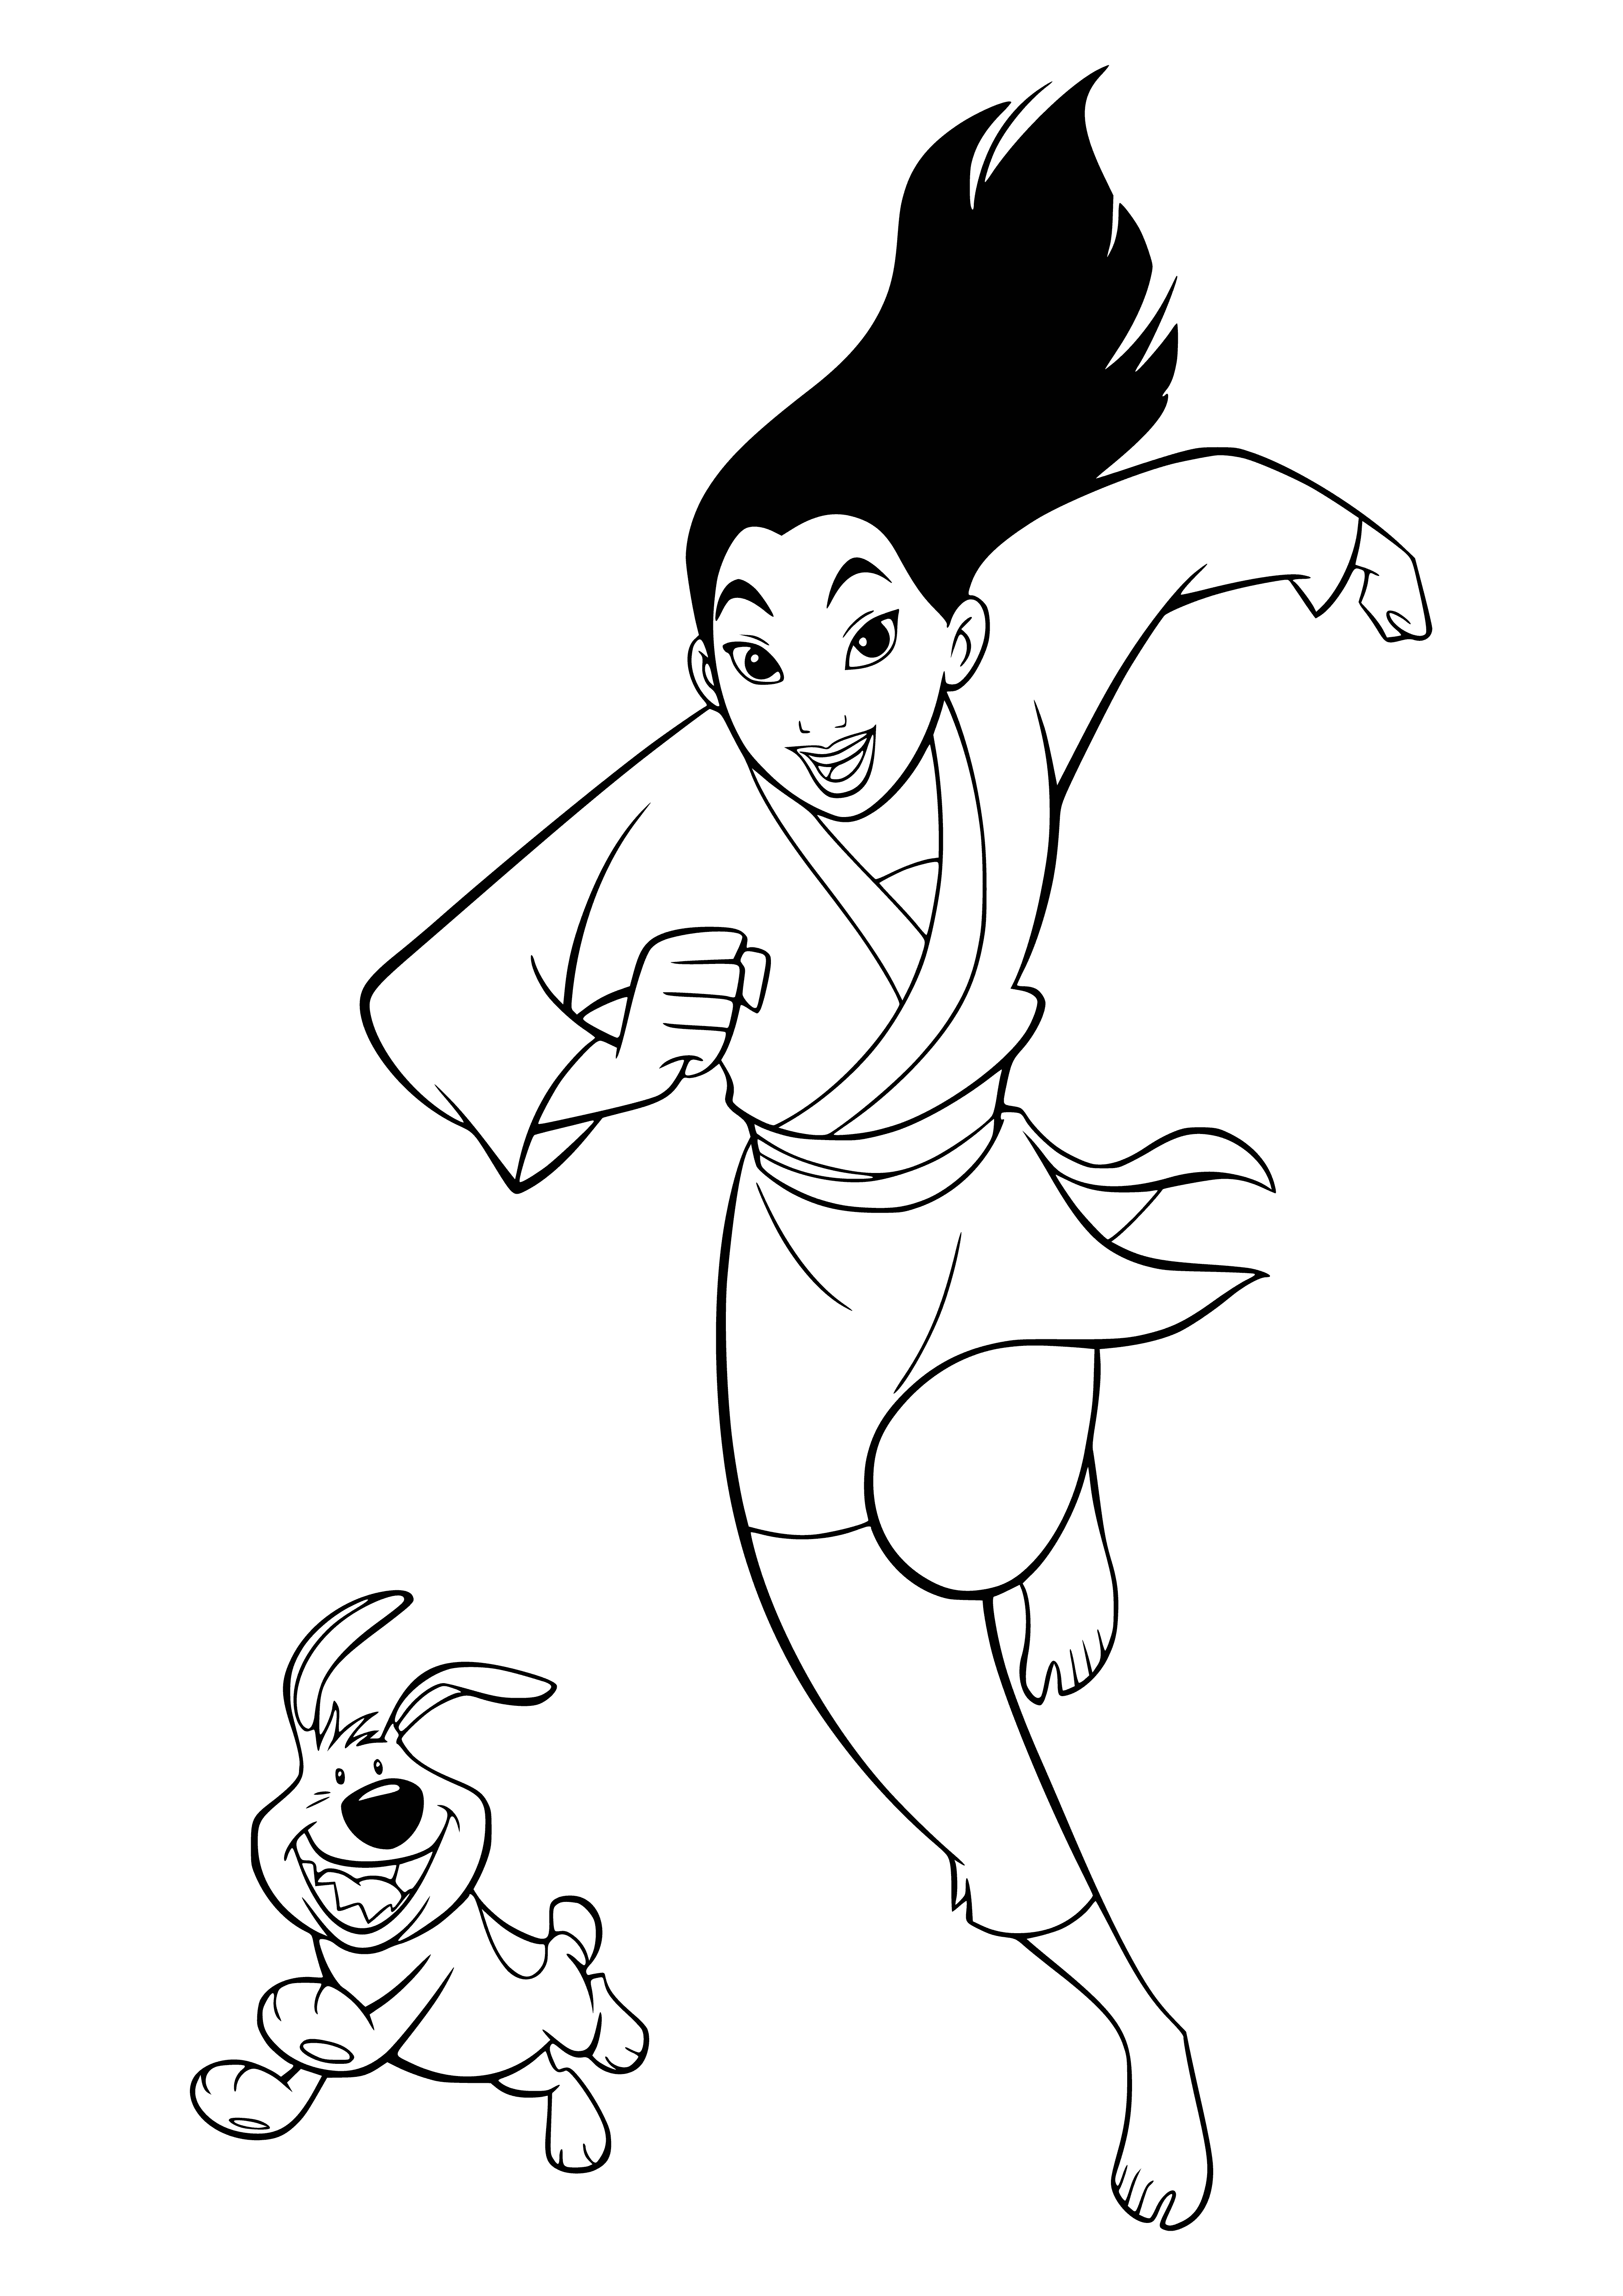 Mulan and the puppy coloring page